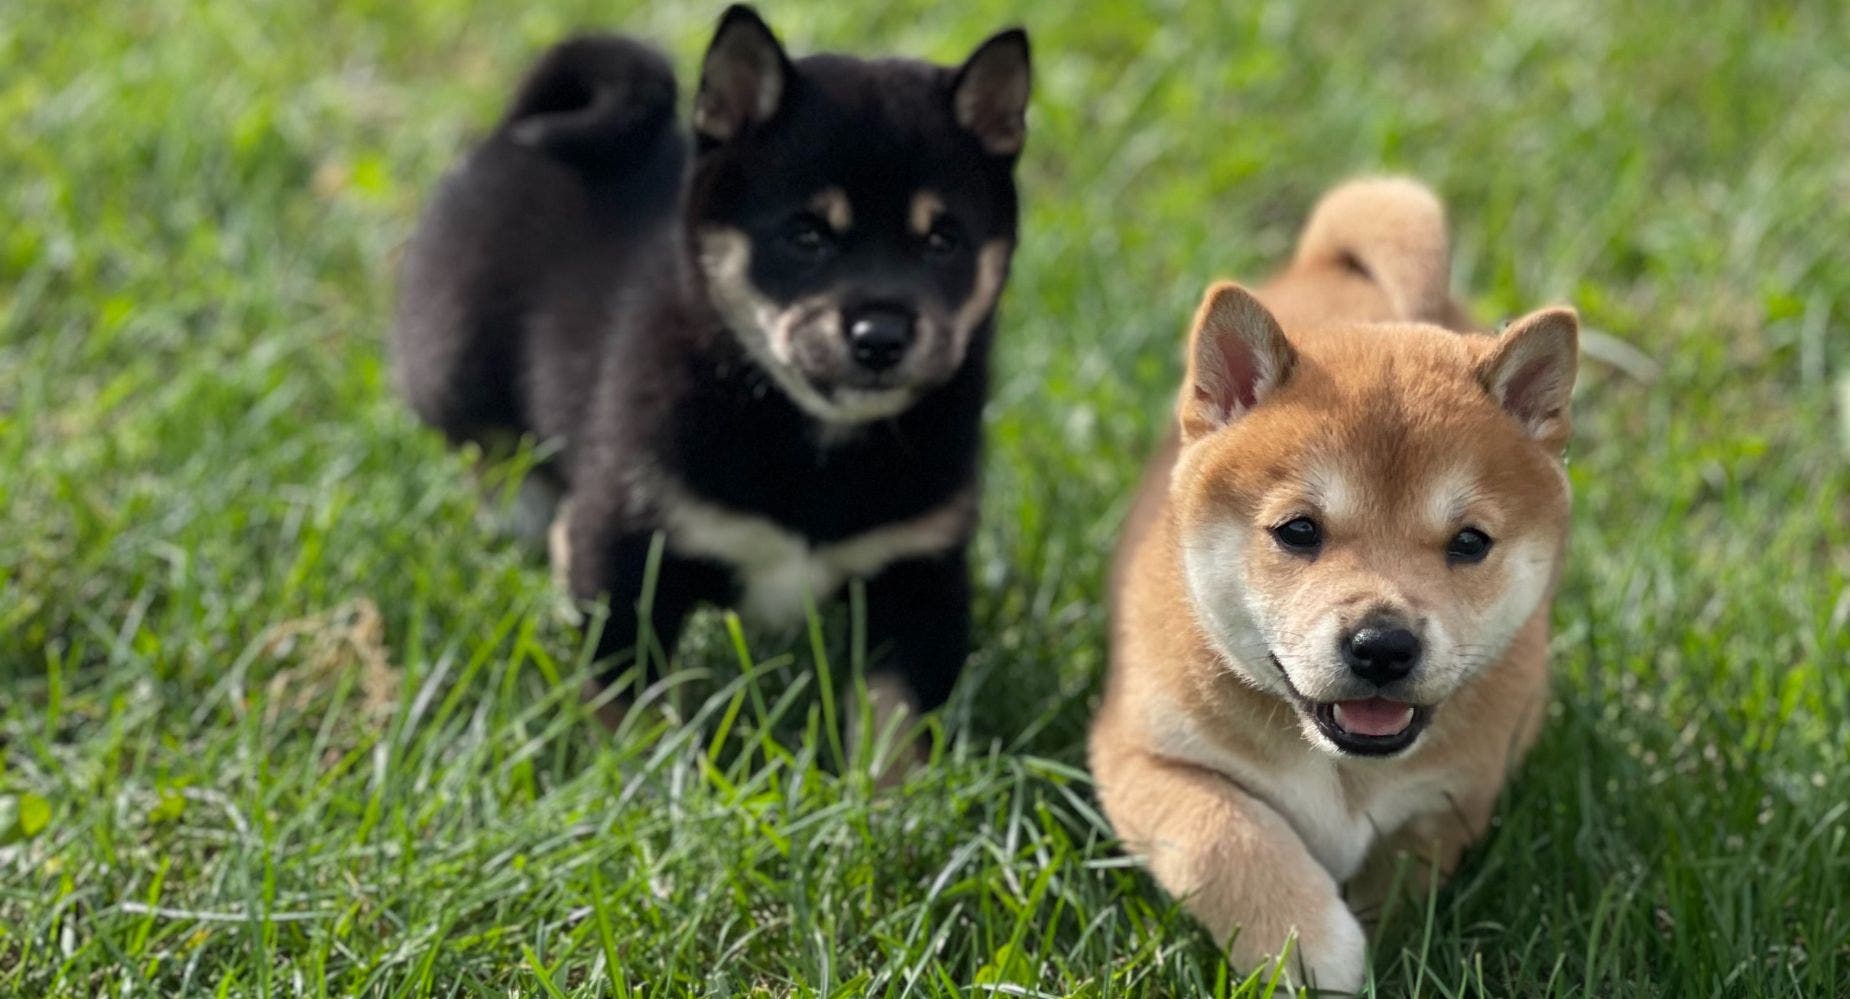 Memecoins Shiba Inu, Dogecoin See Most Turnover After Bitcoin, Ethereum On OKX Spot Trading